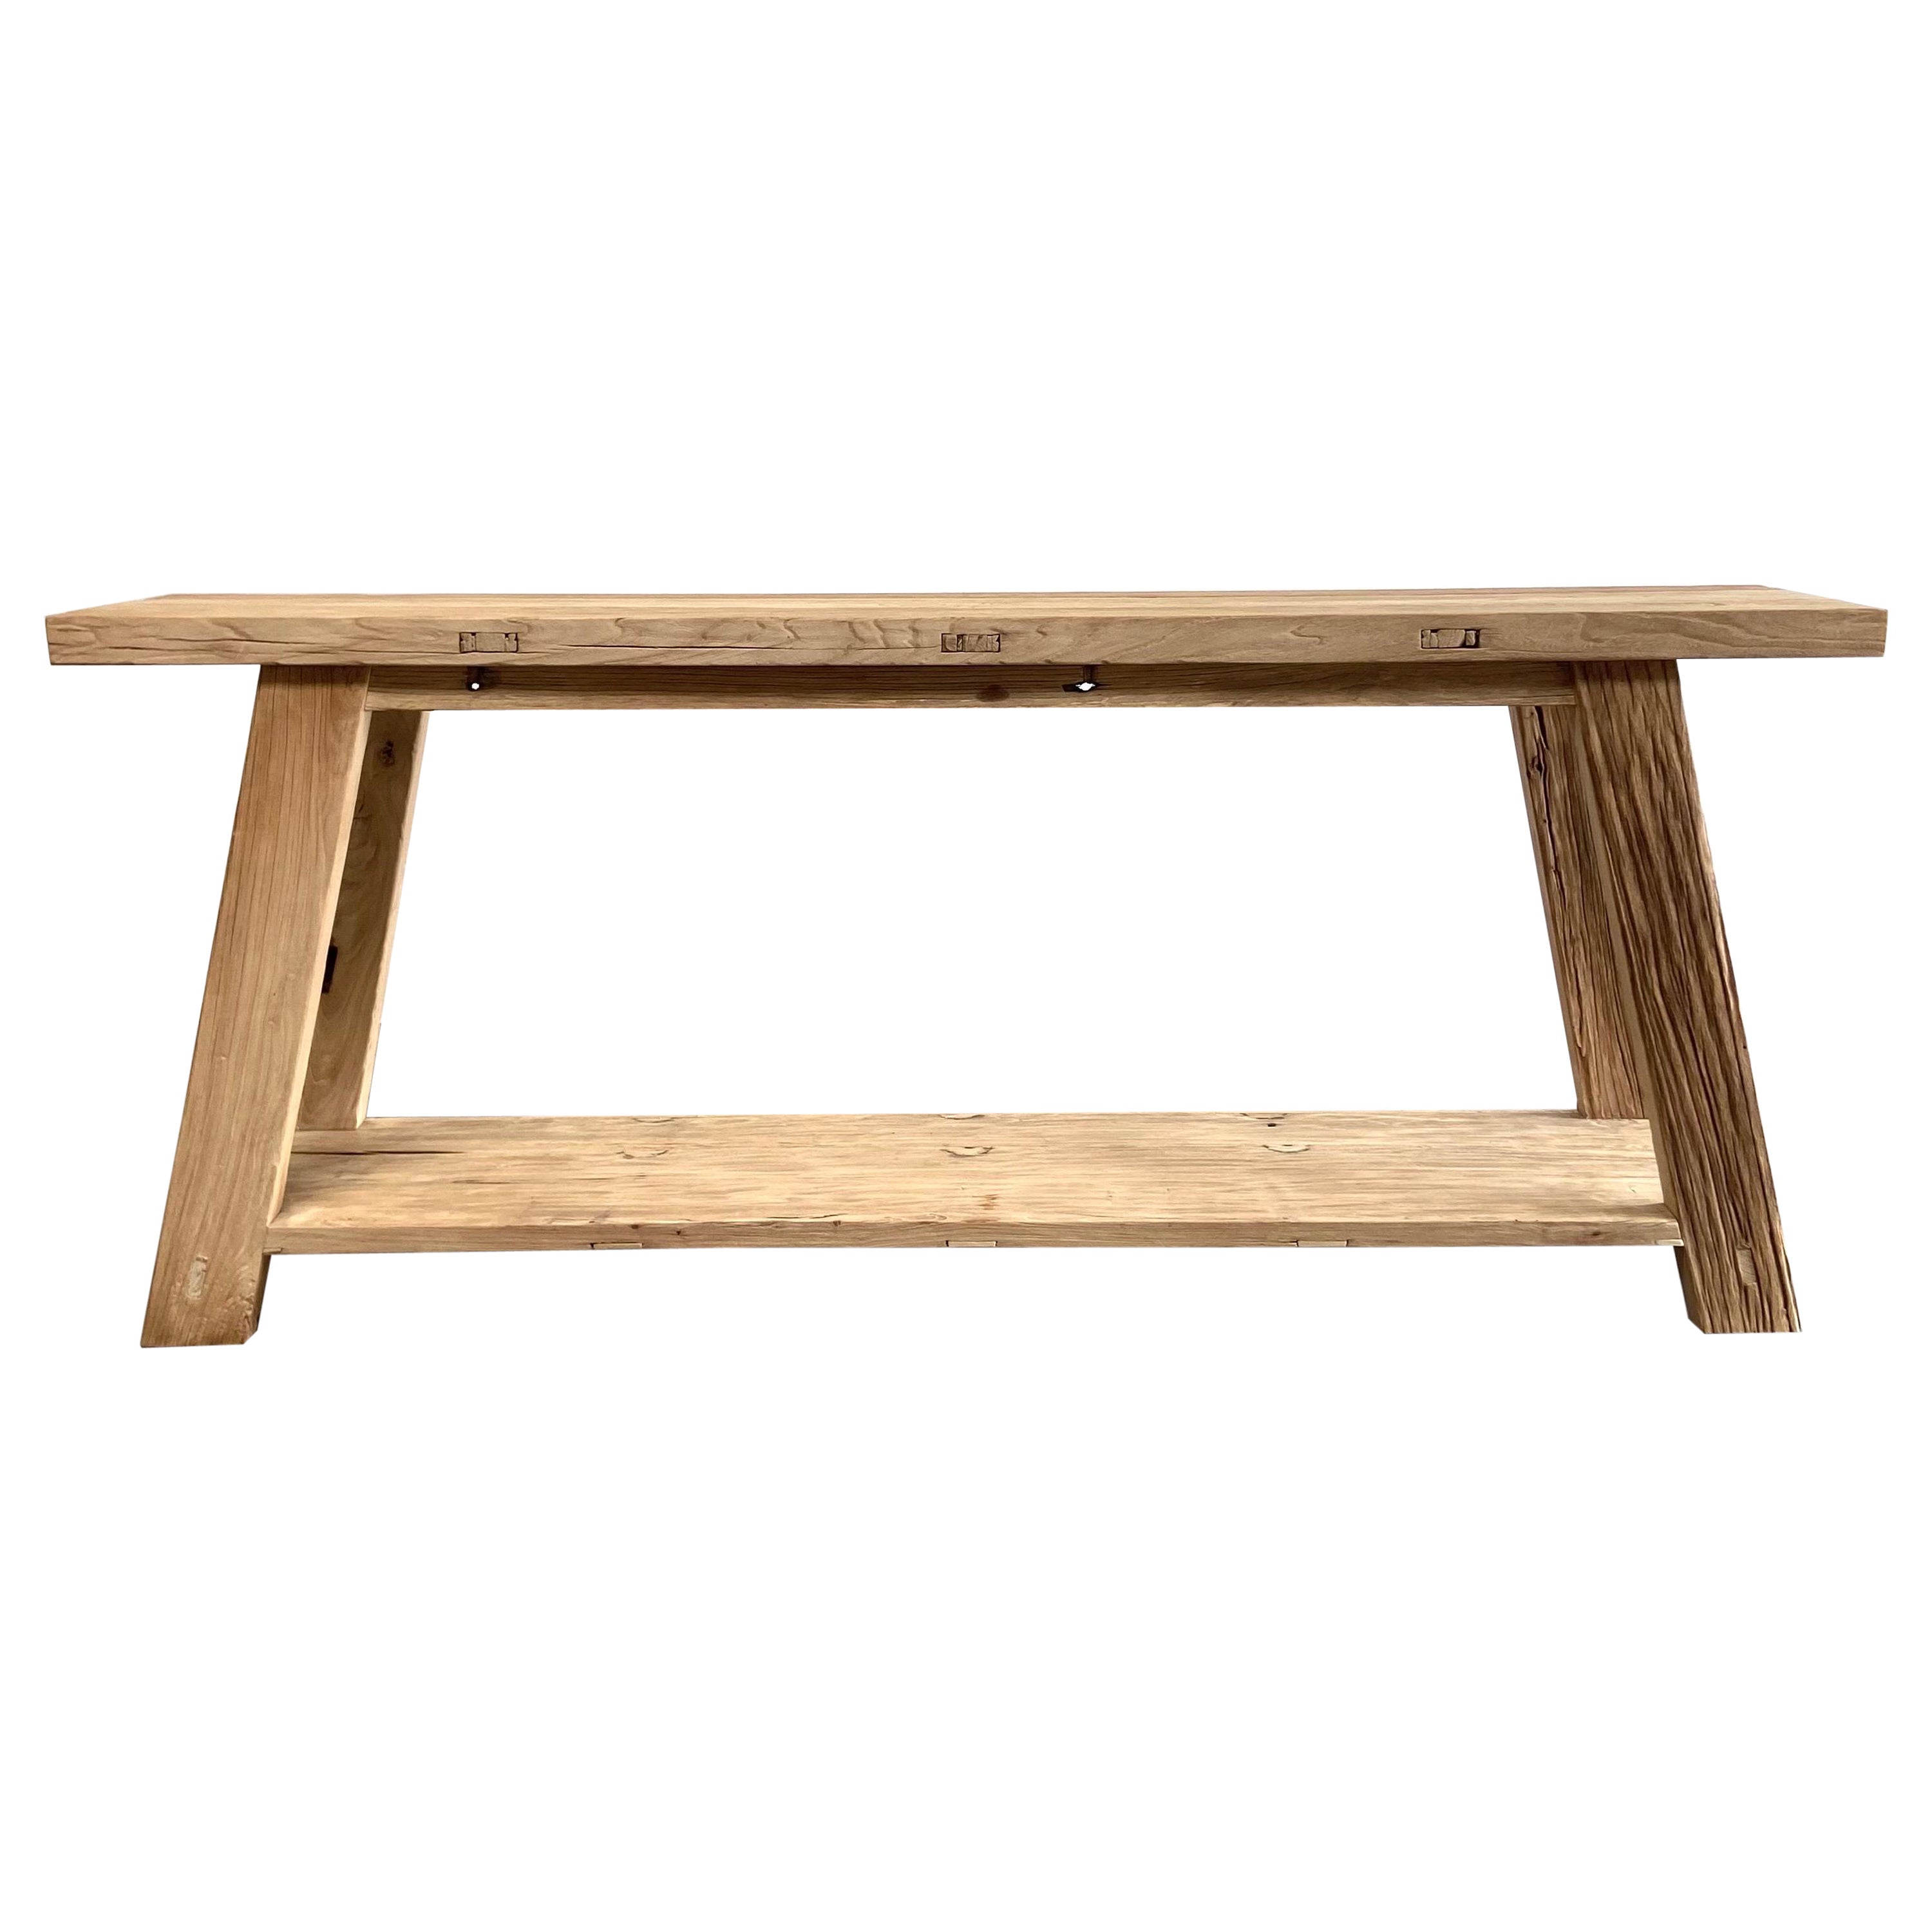 Custom Made Reclaimed Elm Wood Console Table with Low Shelf